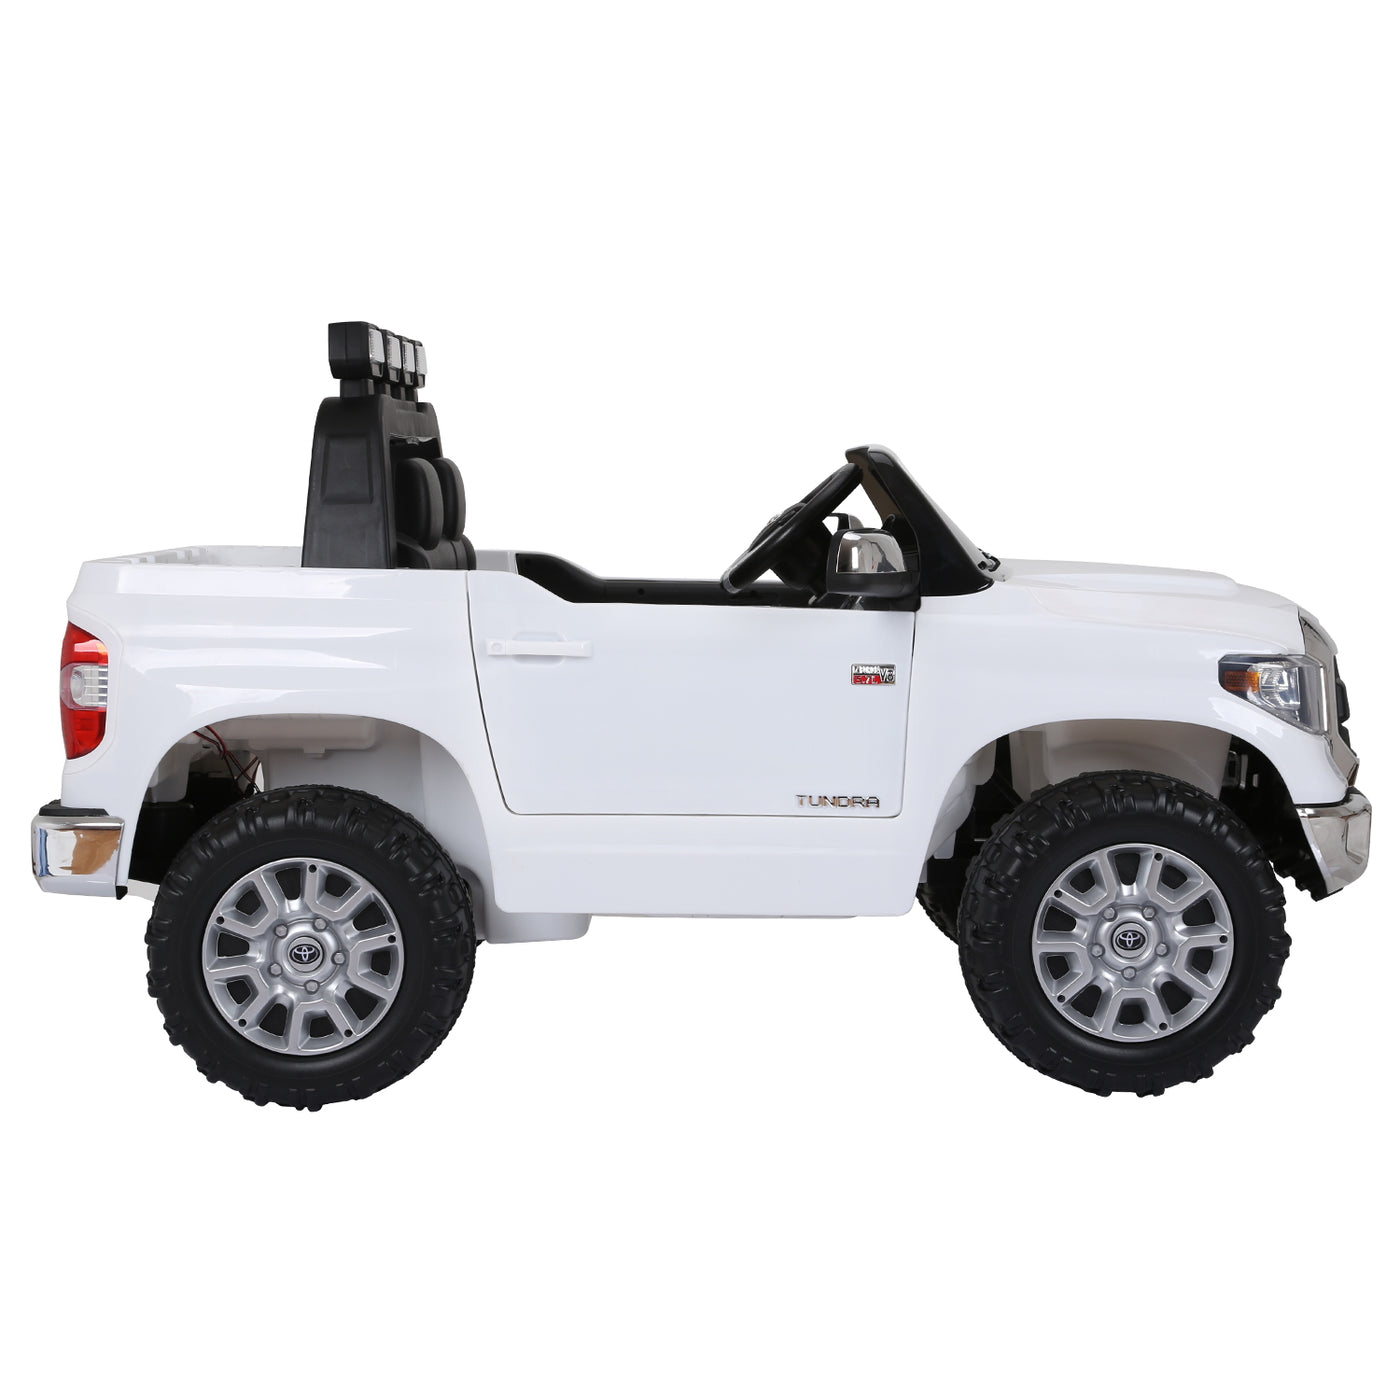 Electric Ride On Car with Remote Control for Kids, 12V Battery Powered Official Licensed TUNDRA Toddler Ride On Toy, Opening Doors, Musics, White